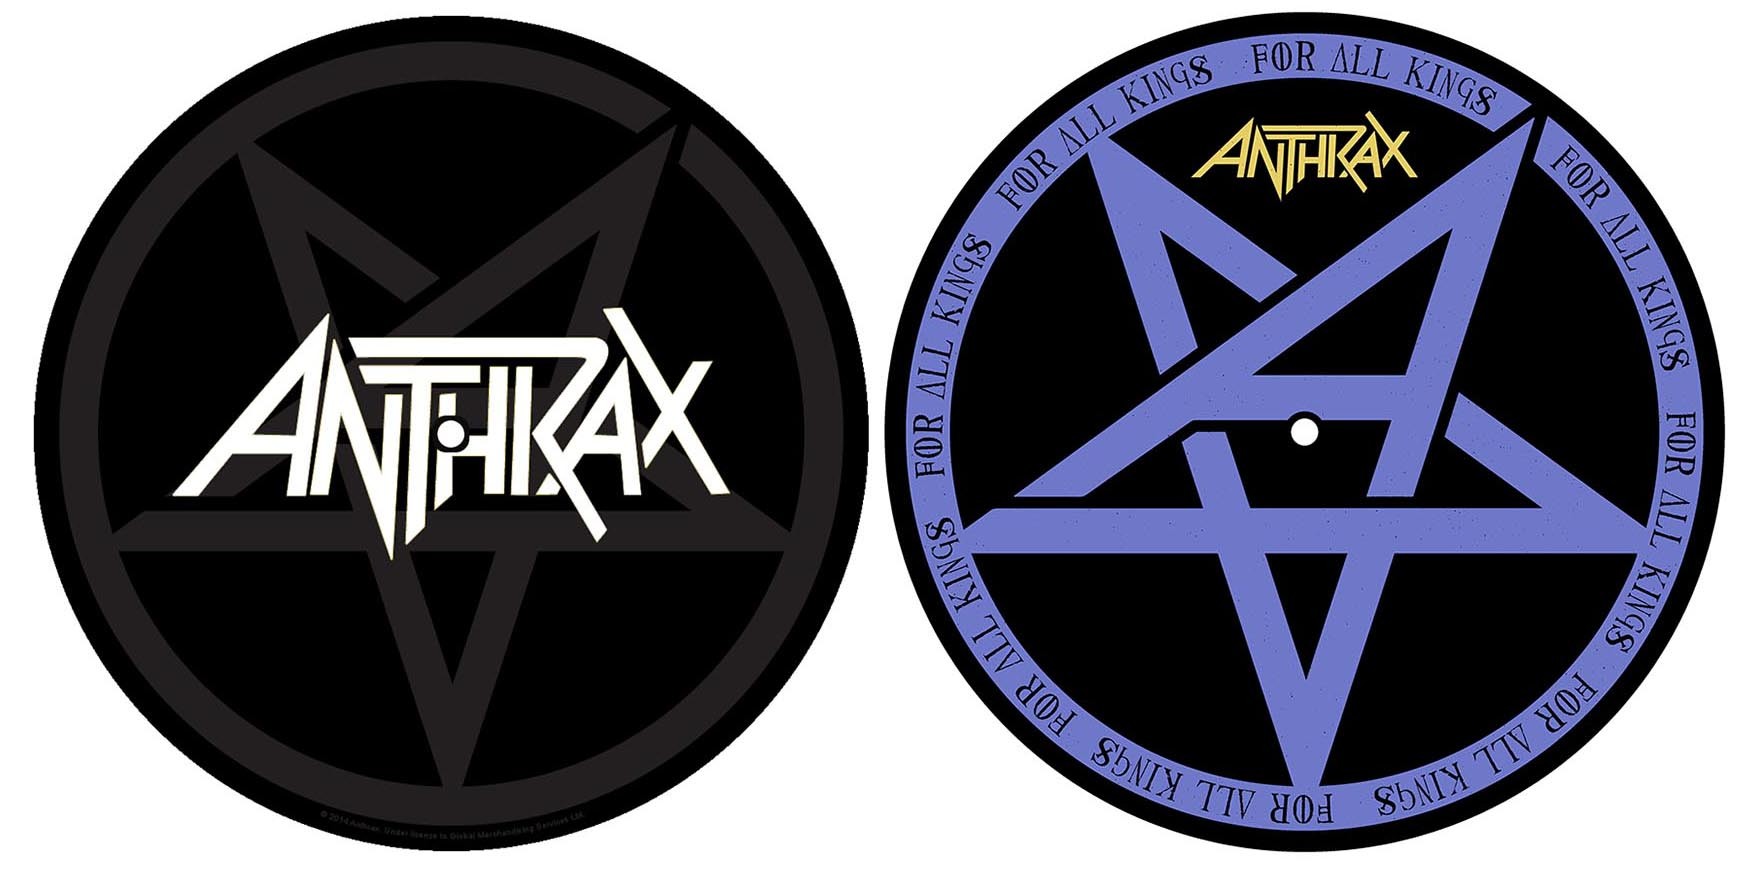 Anthrax - Pentathrax / For All Kings